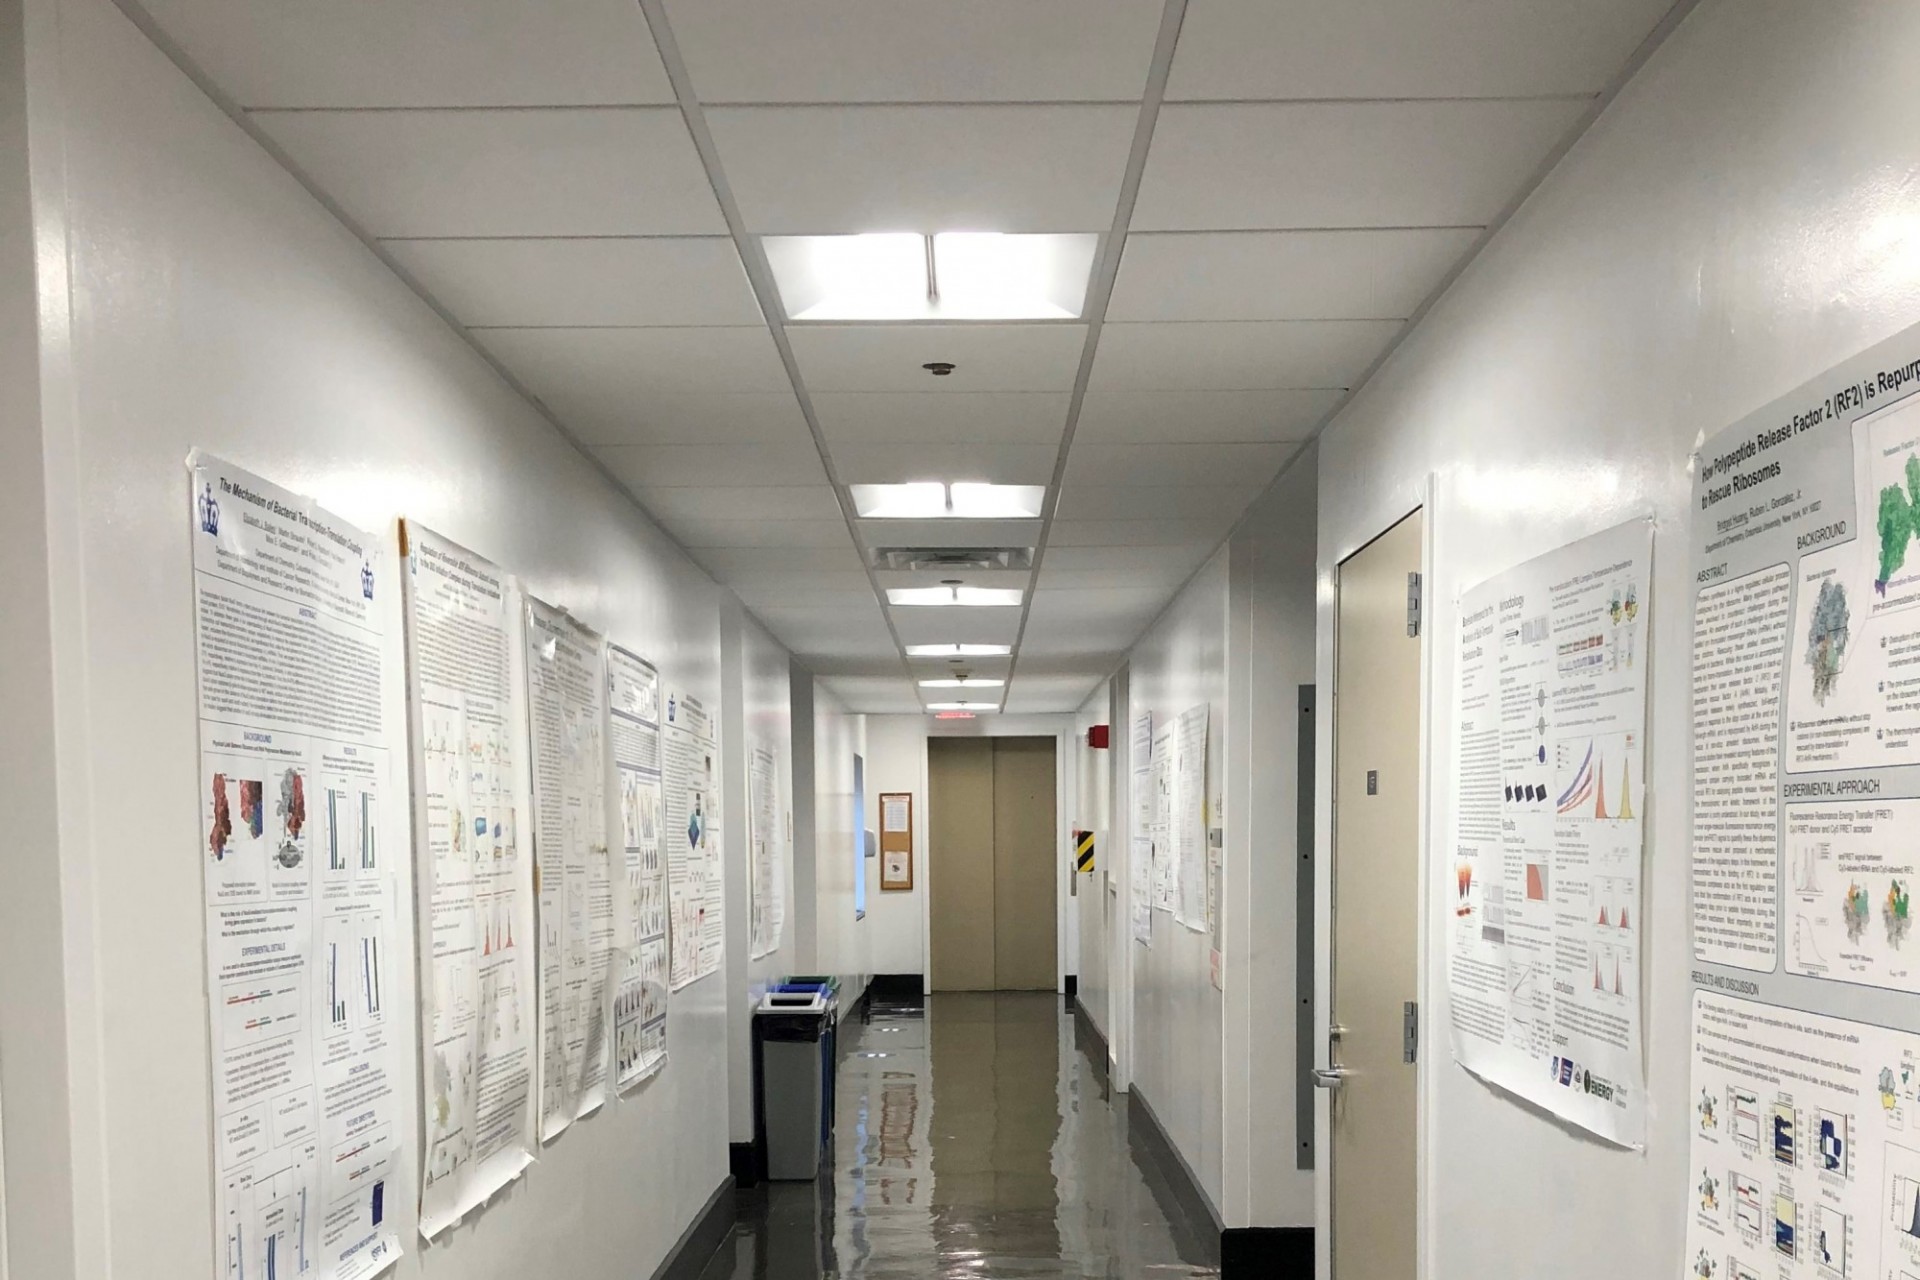 A hallway in Havemeyer Hall that is painted white and has new LED lights installed in the ceiling.